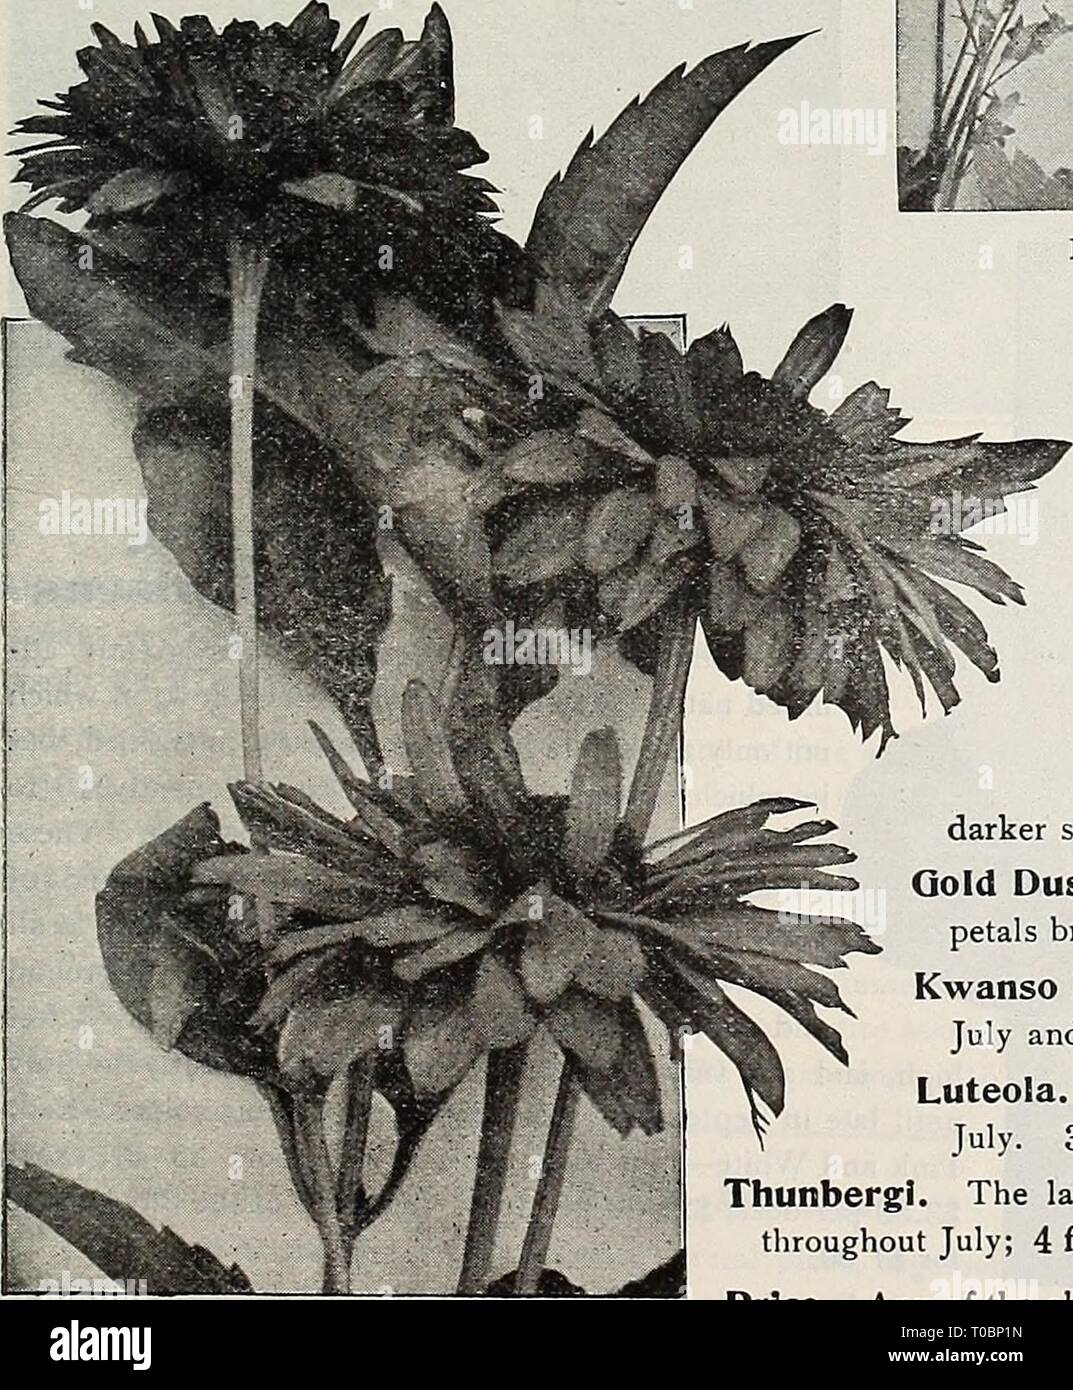 Dreer's garden book 1919 (1919) Dreer's garden book 1919 dreersgardenbook1919henr Year: 1919  lENRTADRKRWIlADELPIIIAfA' HARDY PERENNIAL Mm 183 II£L,IOPSIS (Orange Sunflower) Similar in general habit to Helianthus, but commencing to flower earlier in the season ; July and August; of dwarfer habit, rarely exceeding 3 feet in height; very valuable for cutting. Pitcheriana. A desirable variety. The flowers are of a beautiful deep golden- yellow, about two inches in diameter, of very thick texture and a useful cut flower. Pitcheriana Semi^plena. A semi-double form of the above. Scabra Excelsa. A ne Stock Photo